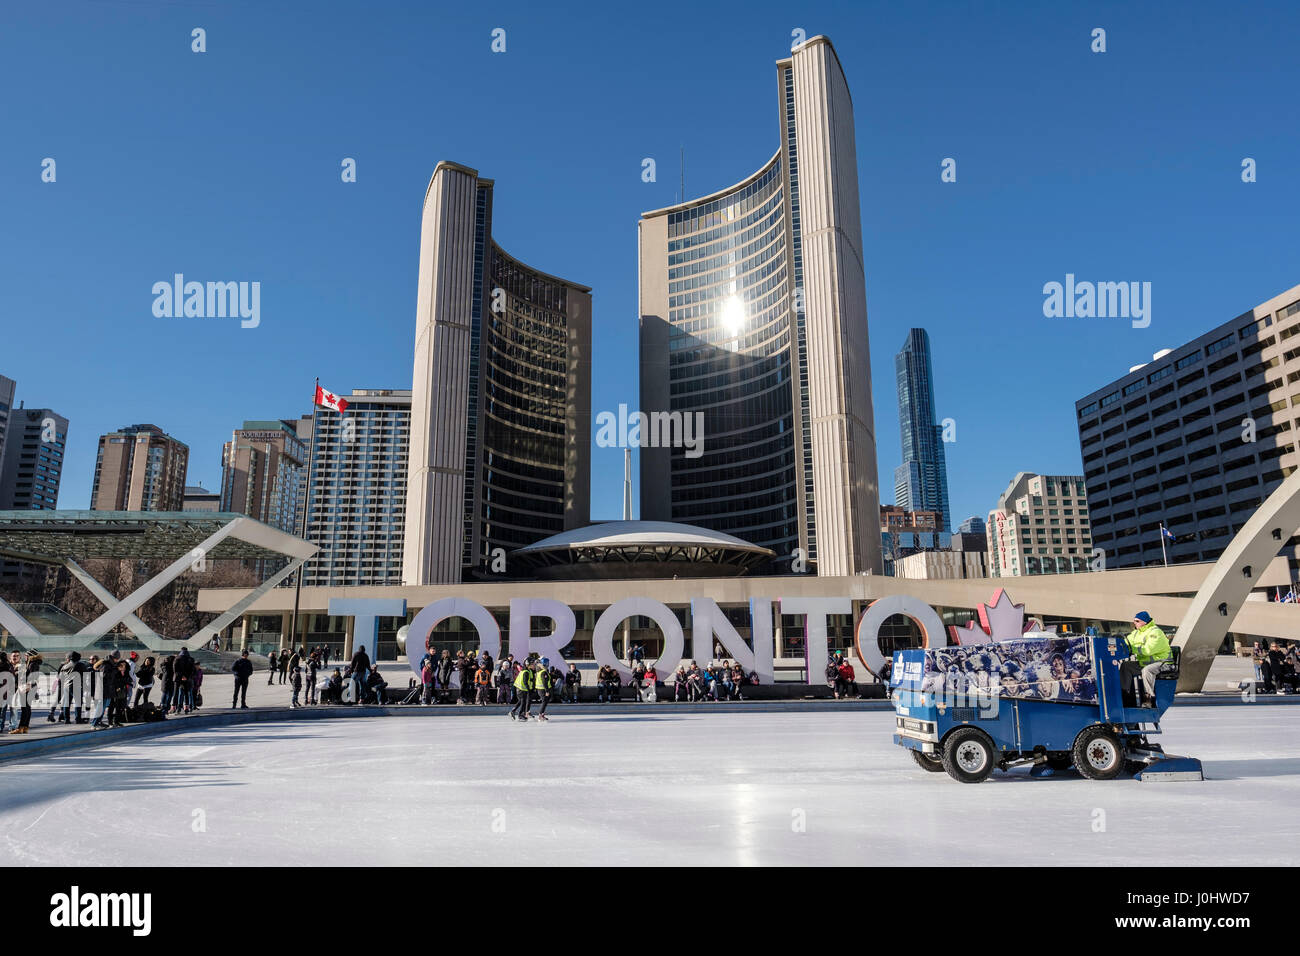 Toronto City Hall, Nathan Phillips Square in winter, zamboni grooming ice skating rink, Toronto sign, people in downtown Toronto, Ontario, Canada. Stock Photo